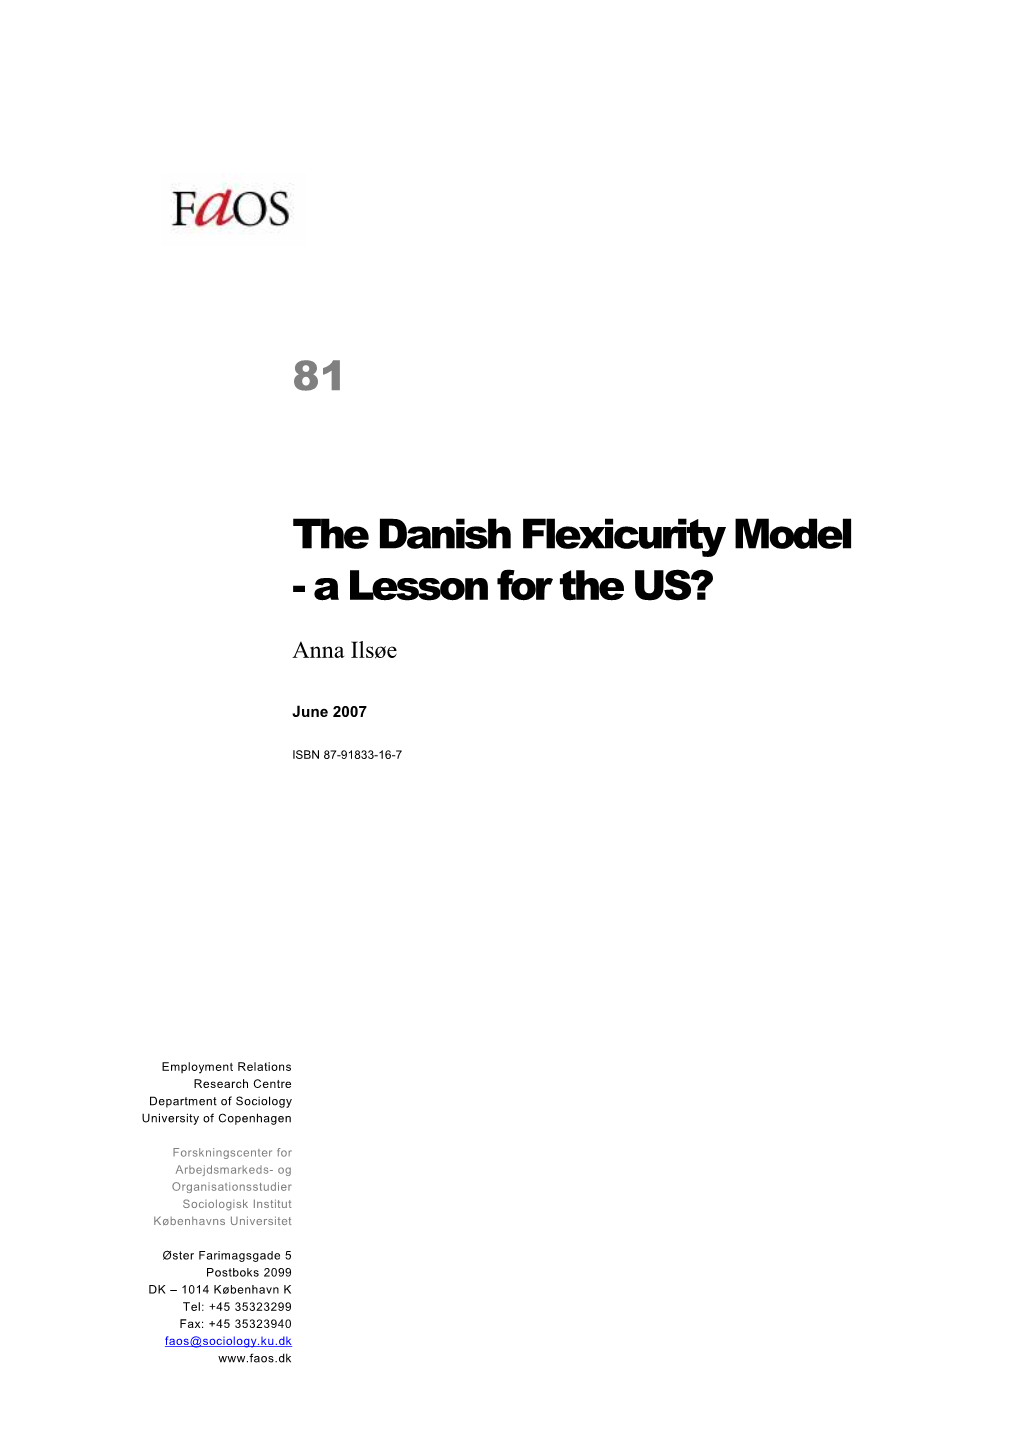 The Danish Flexicurity Model - a Lesson for the US?